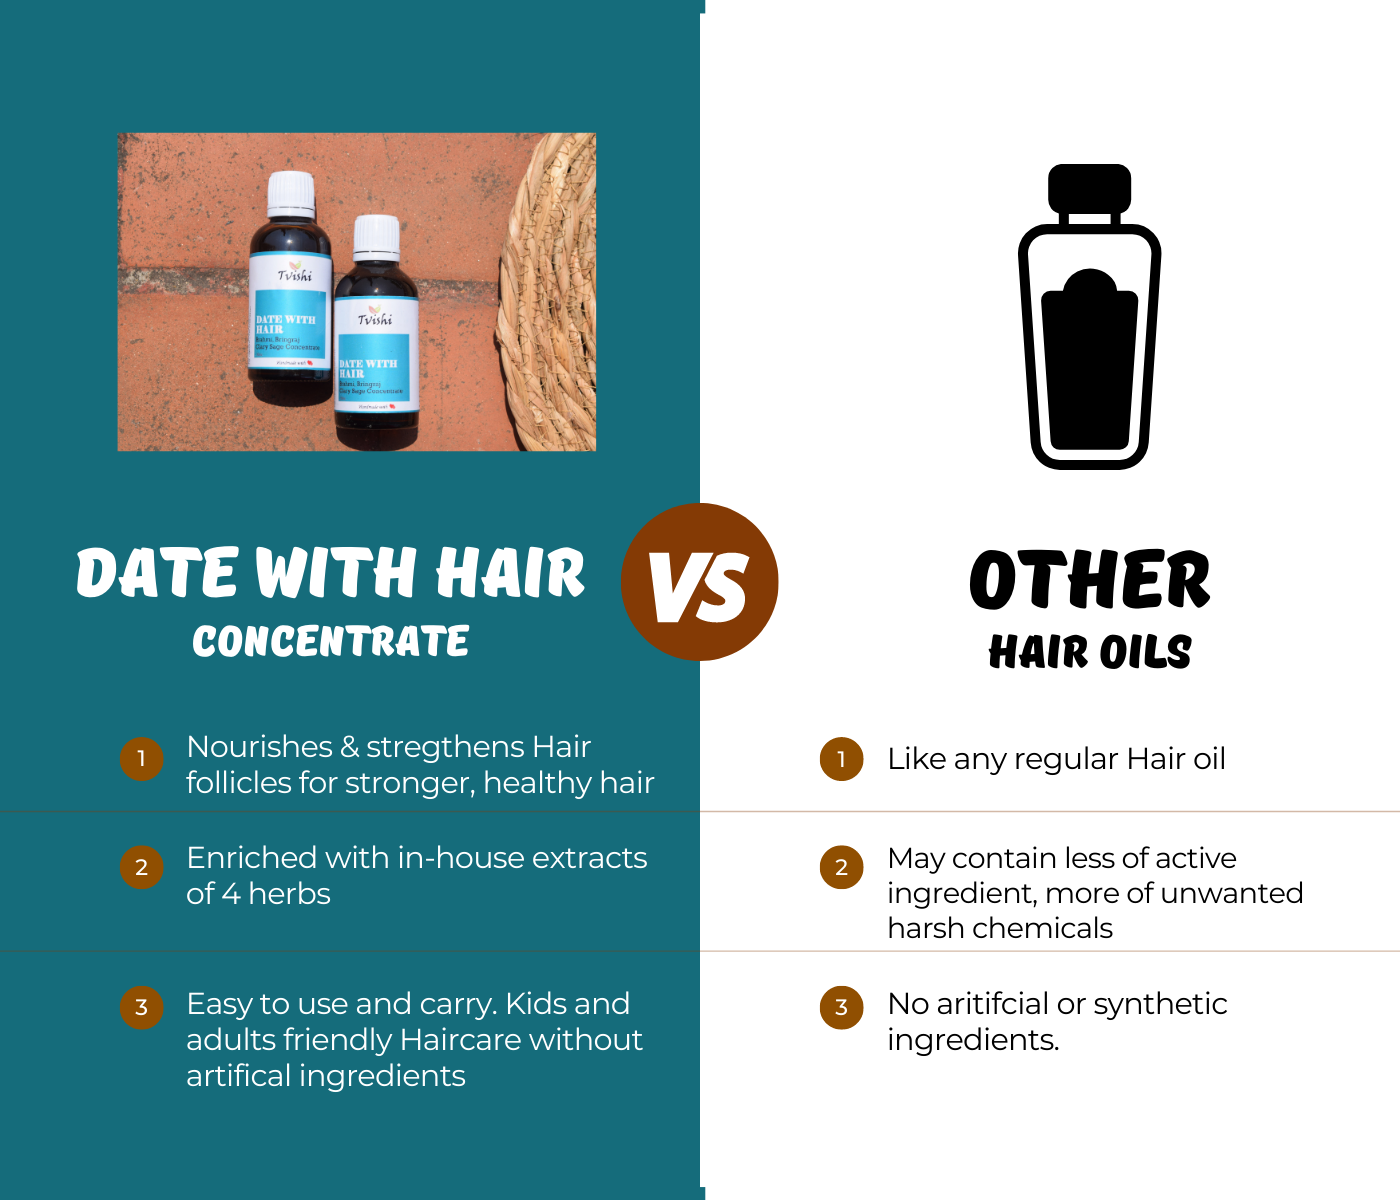 Date with Hair - Concentrate